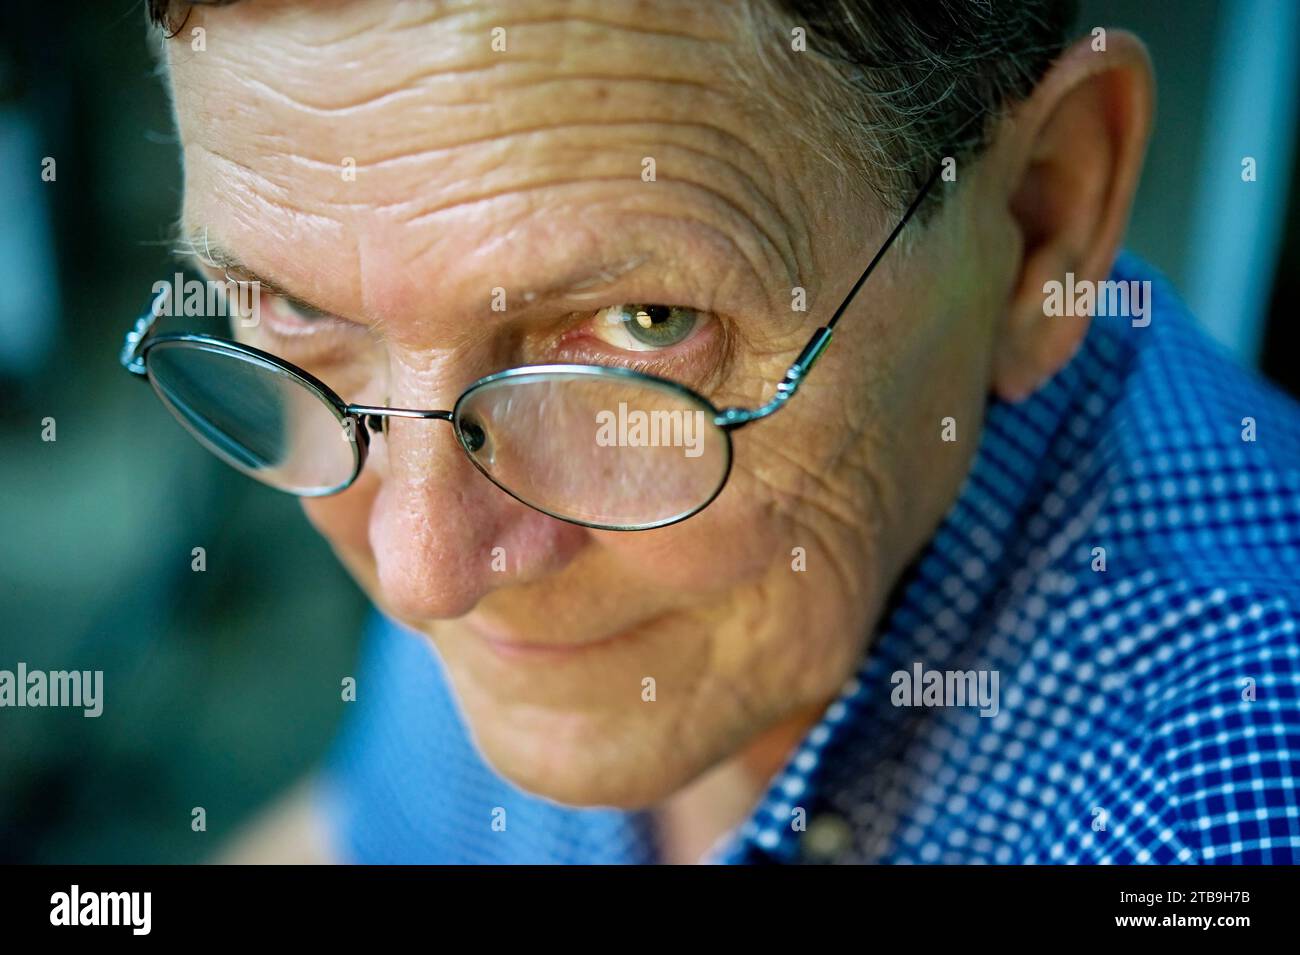 Close-up portrait of a man wearing eyeglasses, looking up at the camera; Houston,Texas, United States of America Stock Photo